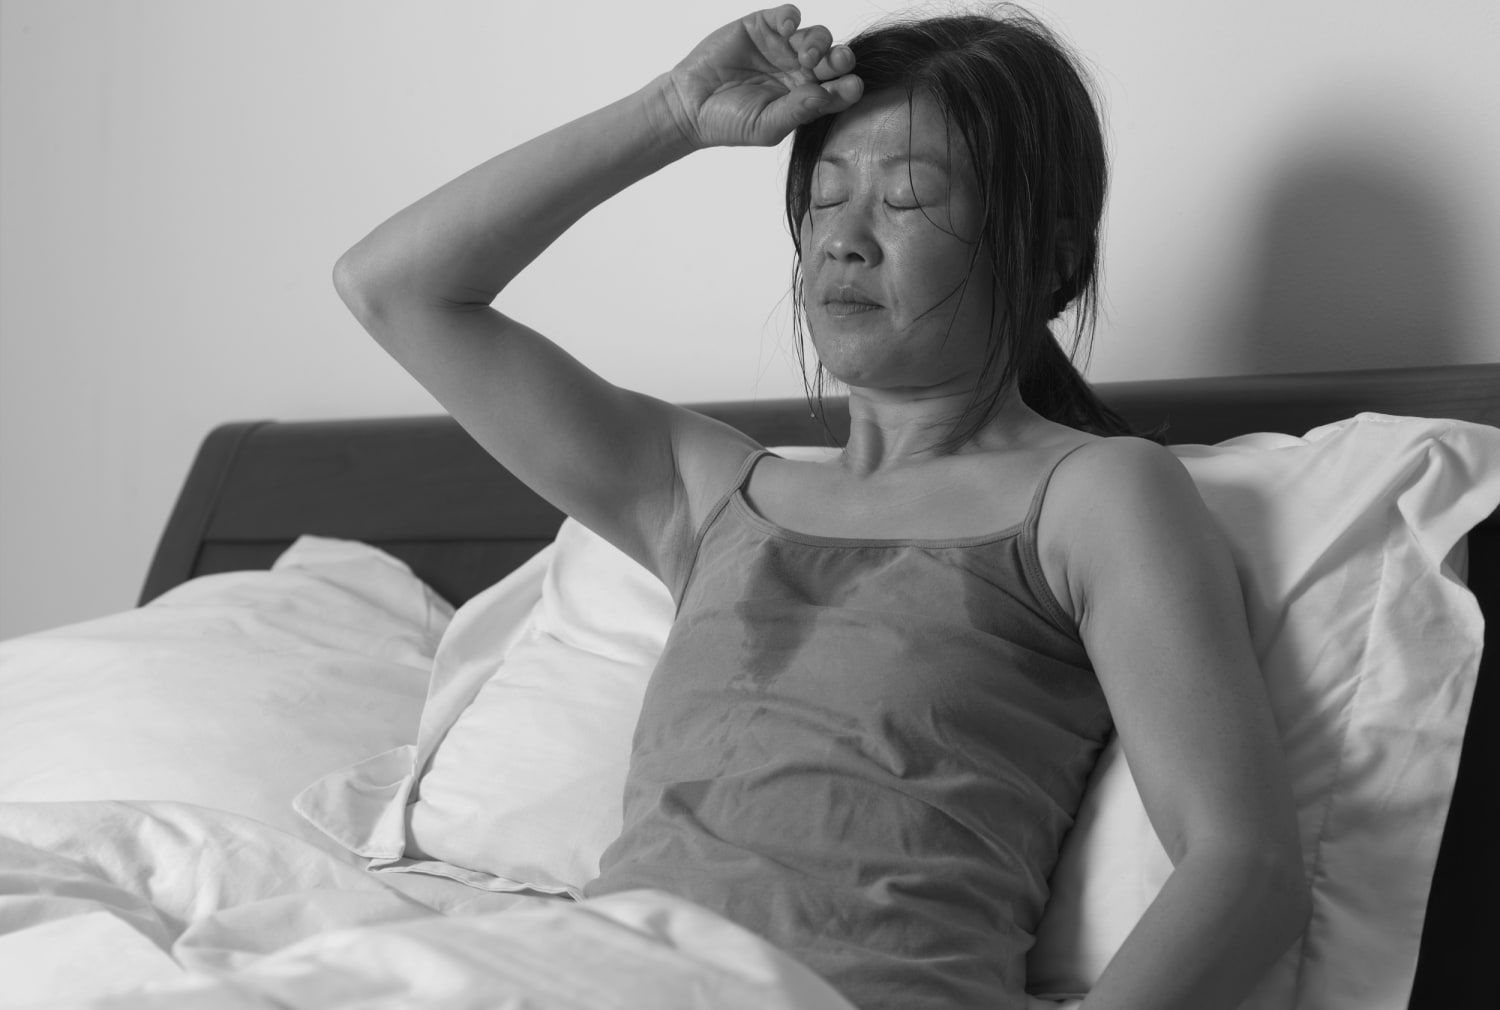 FDA approves drug to treat hot flashes and night sweats